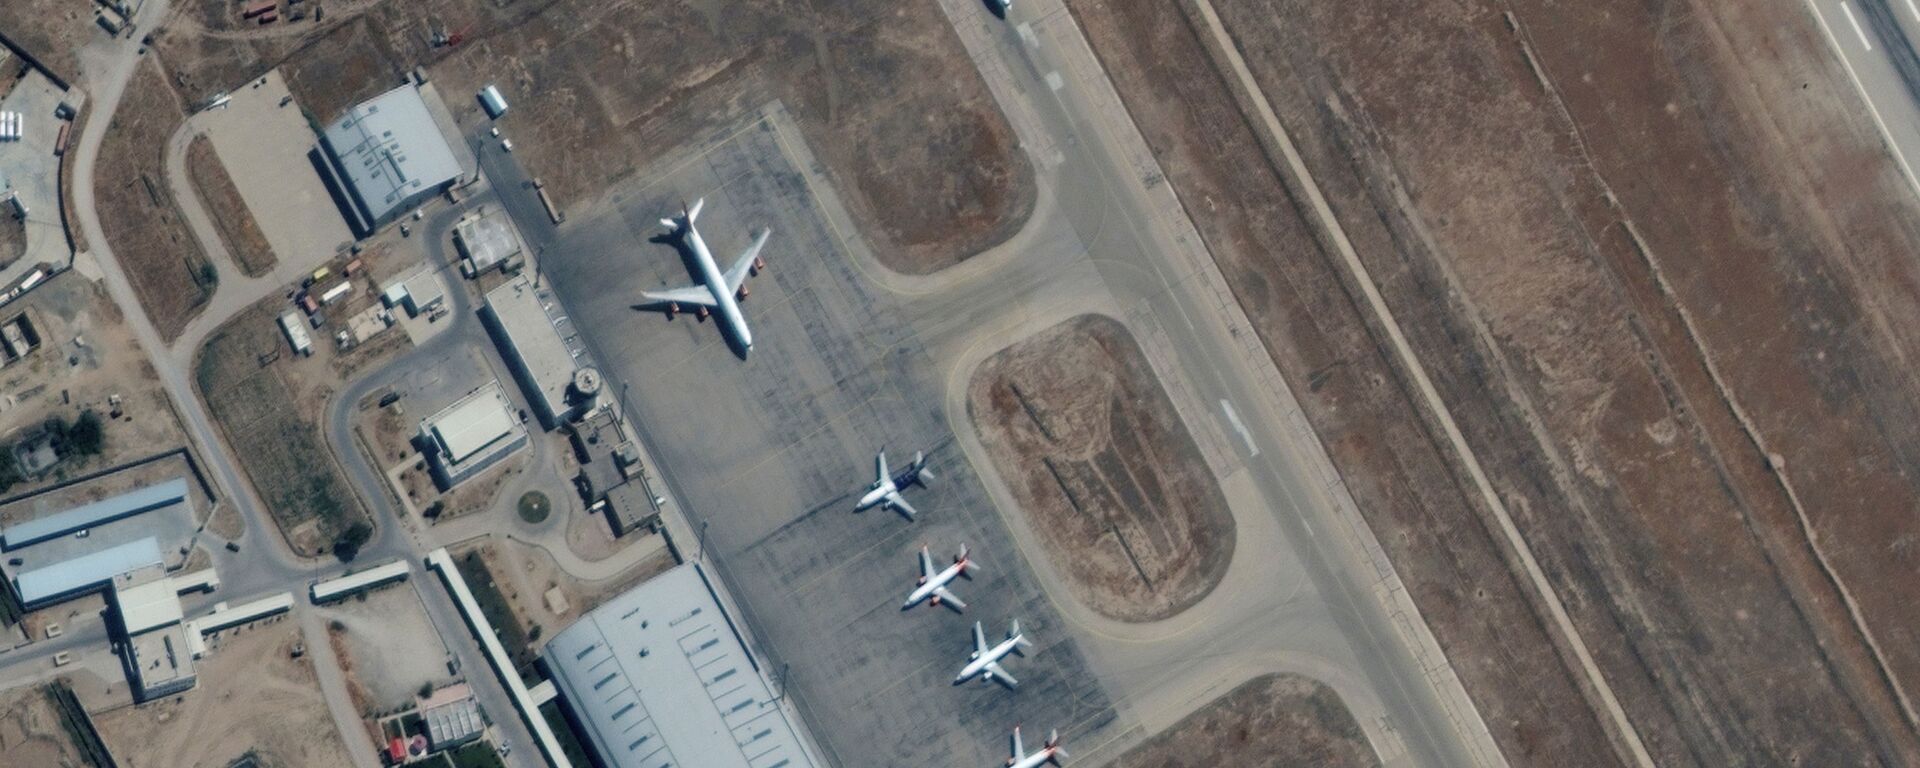 Six commercial airplanes are seen near the main terminal of the Mazar-i-Sharif airport, in northern Afghanistan, September 3 2021. Picture taken September 3, 2021. - Sputnik International, 1920, 05.09.2021